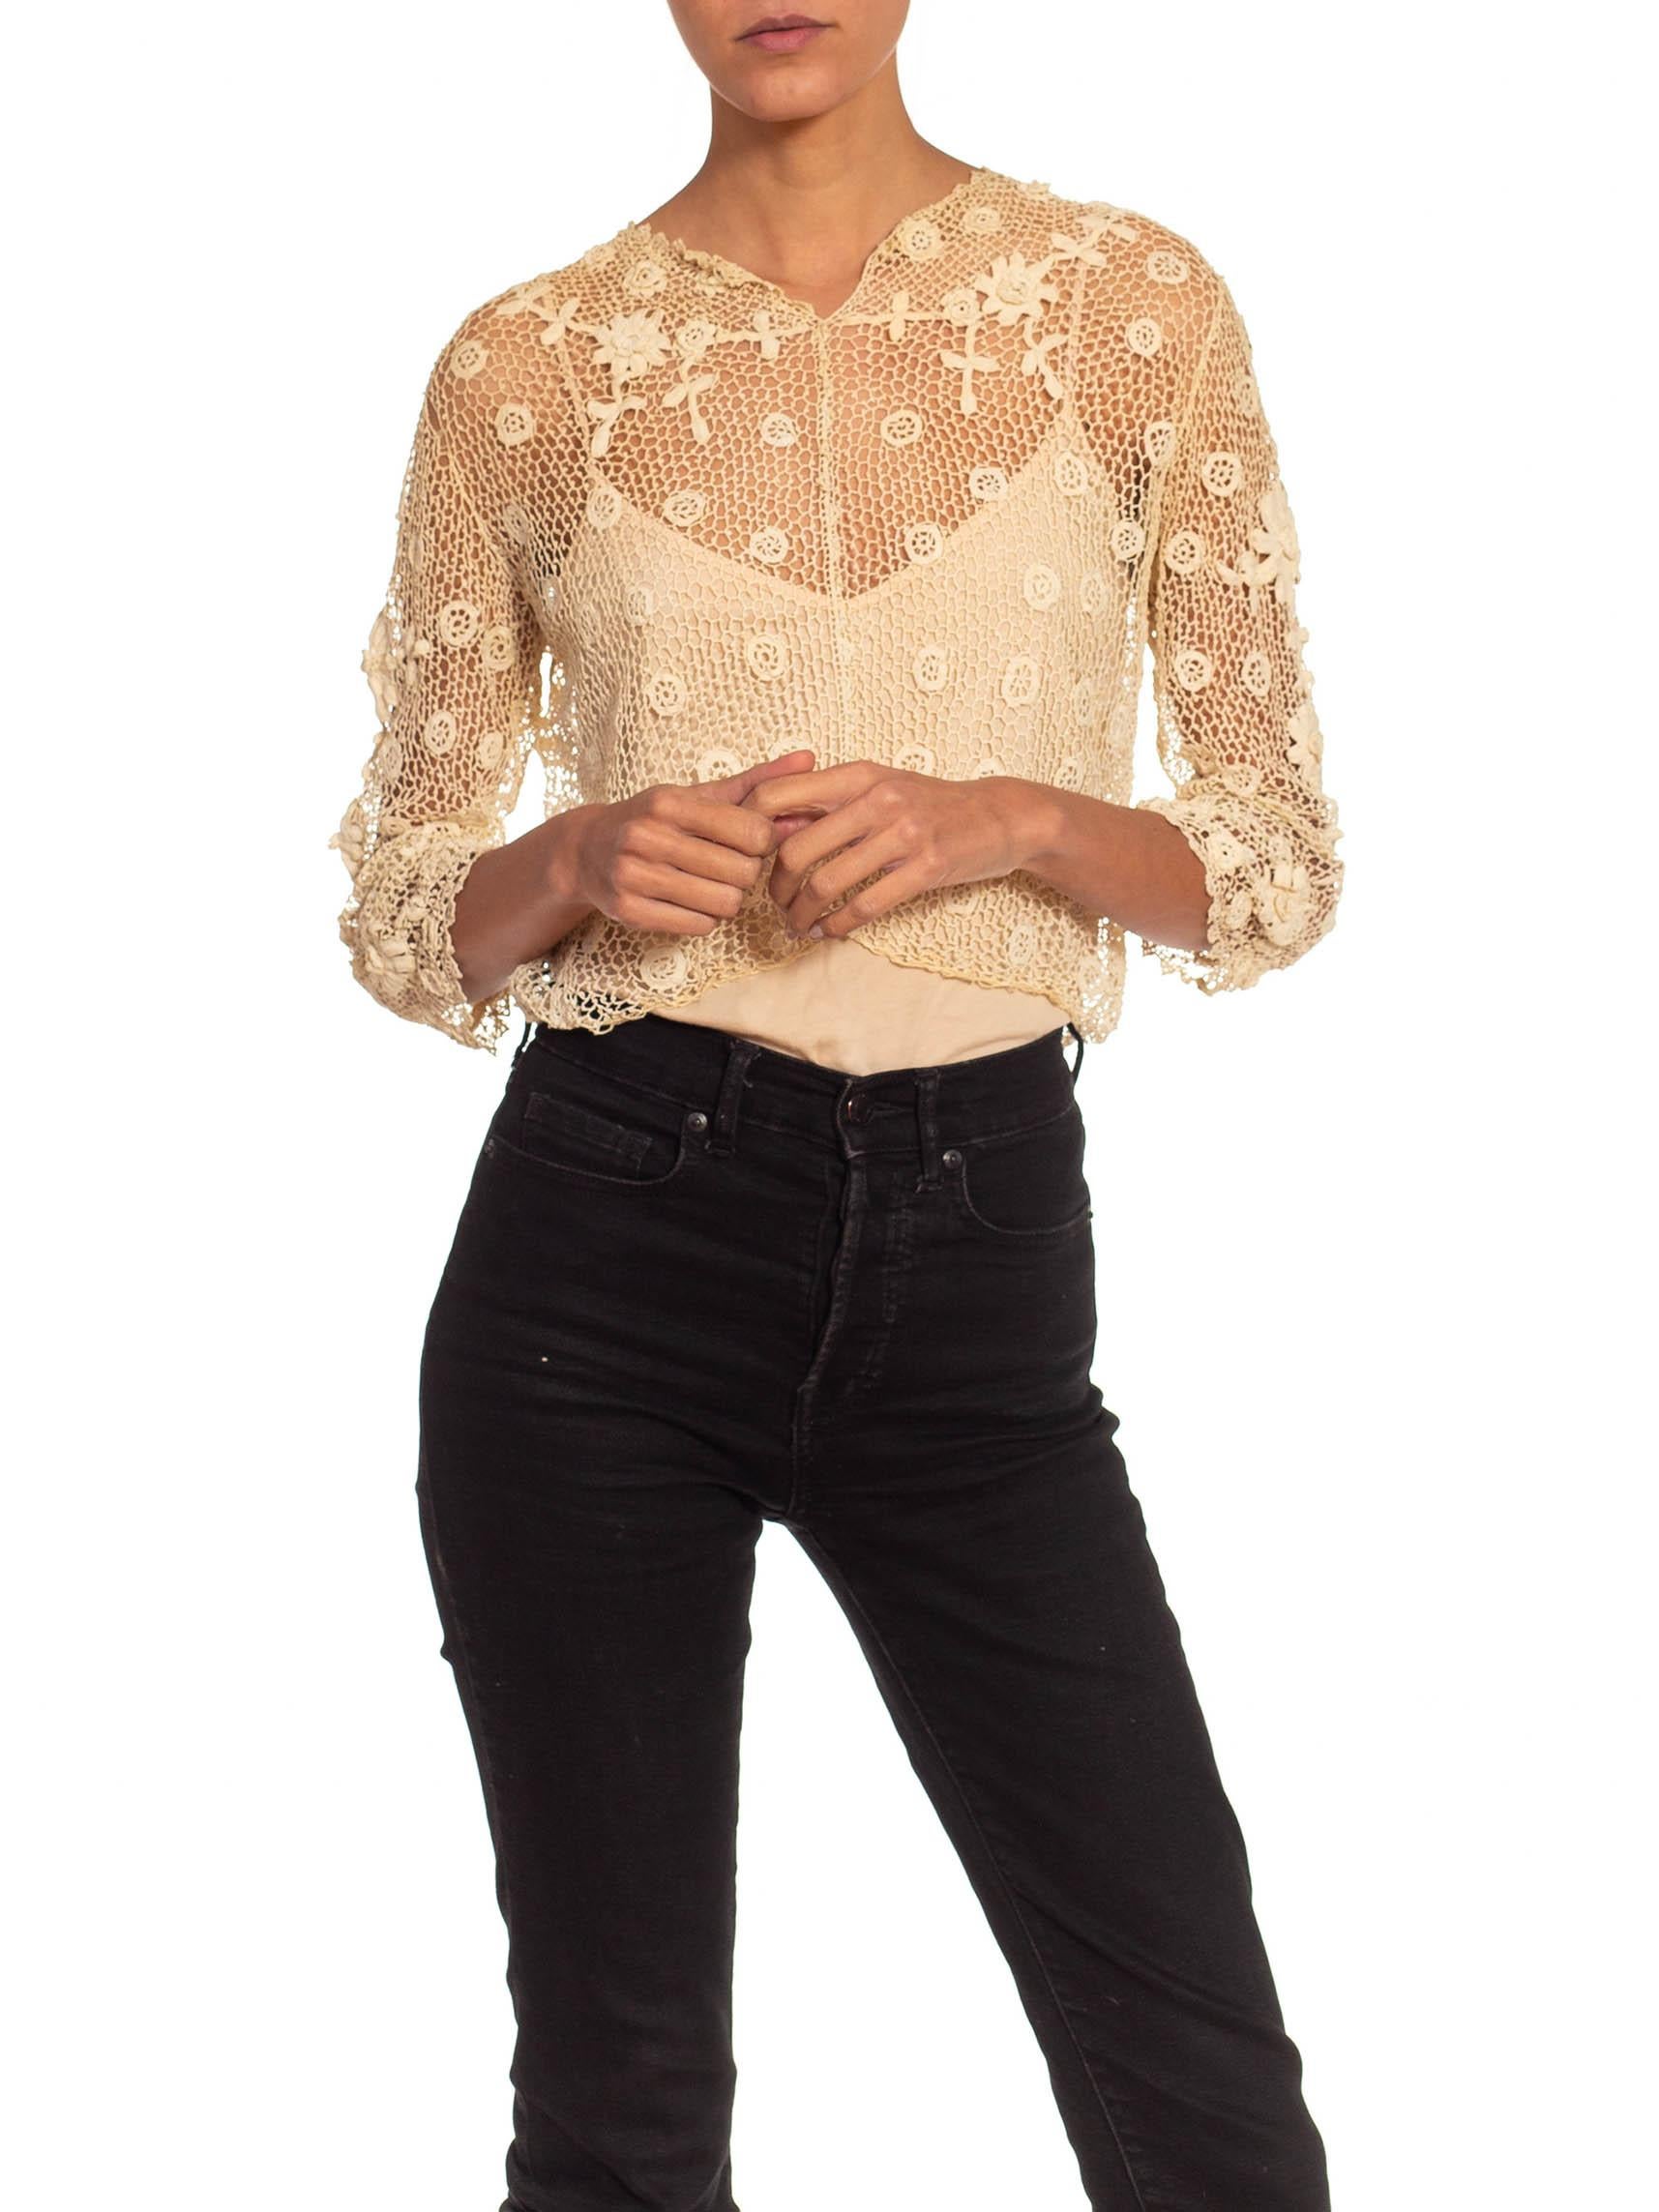 Victorian Cream Cotton Hand Crochet Top With Long Sleeves For Sale 4